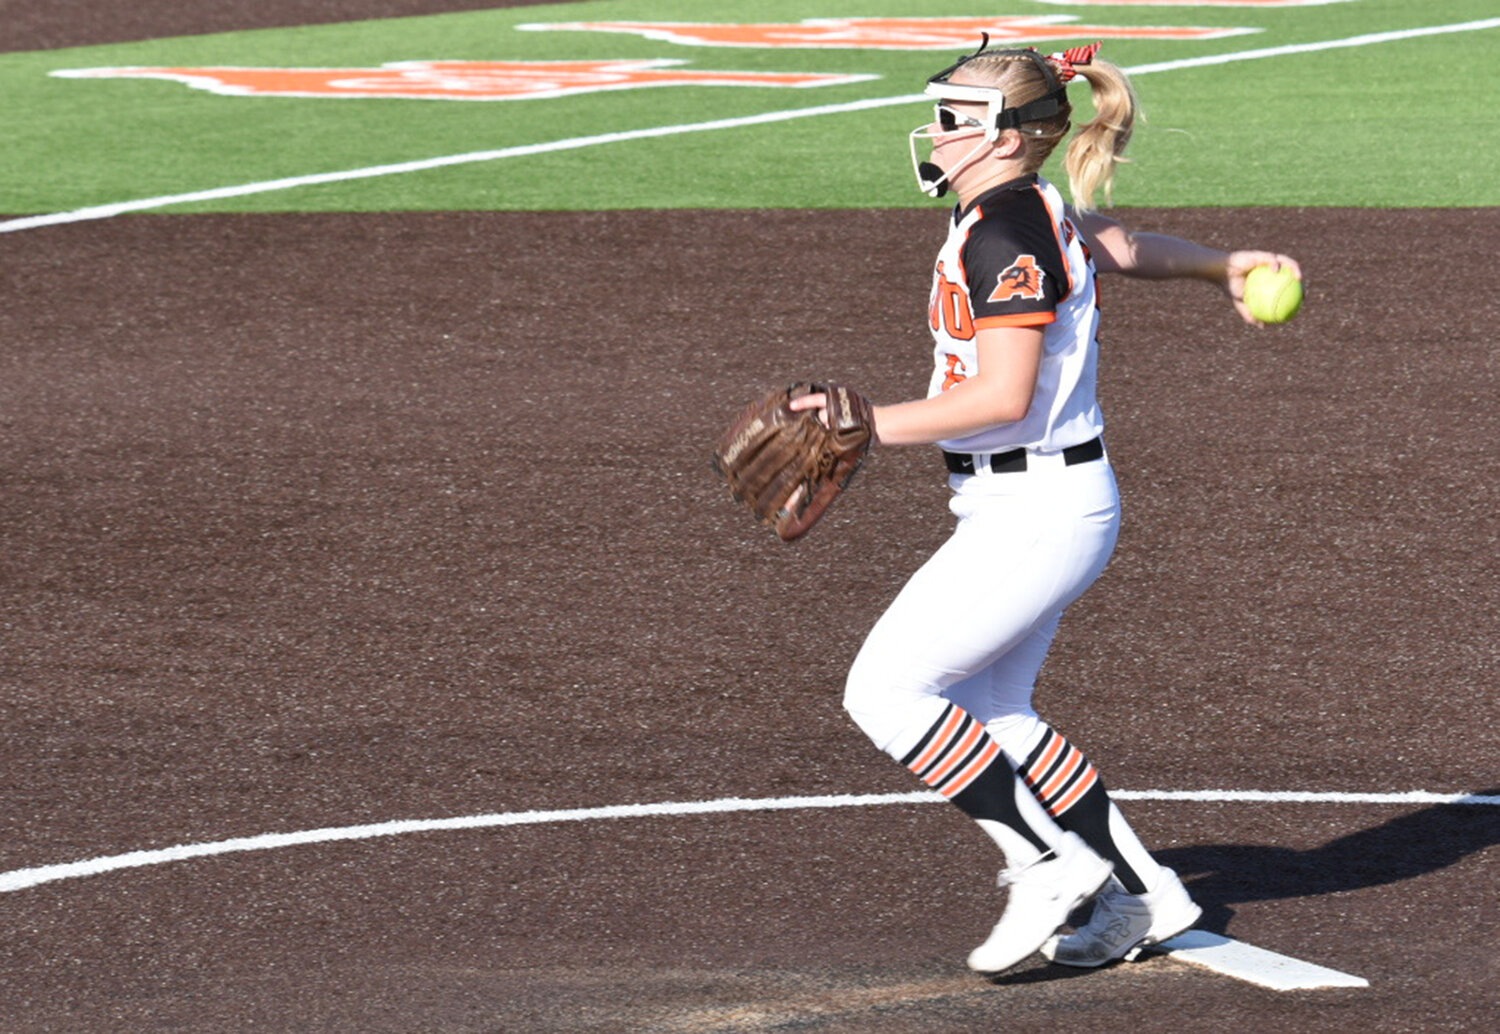 Ladycats' pitcher Taylor McKean struck out 14 of the 15 Trimble Tech batters during Aledo's 15-0  bi-district win on Thuesday, April 27.